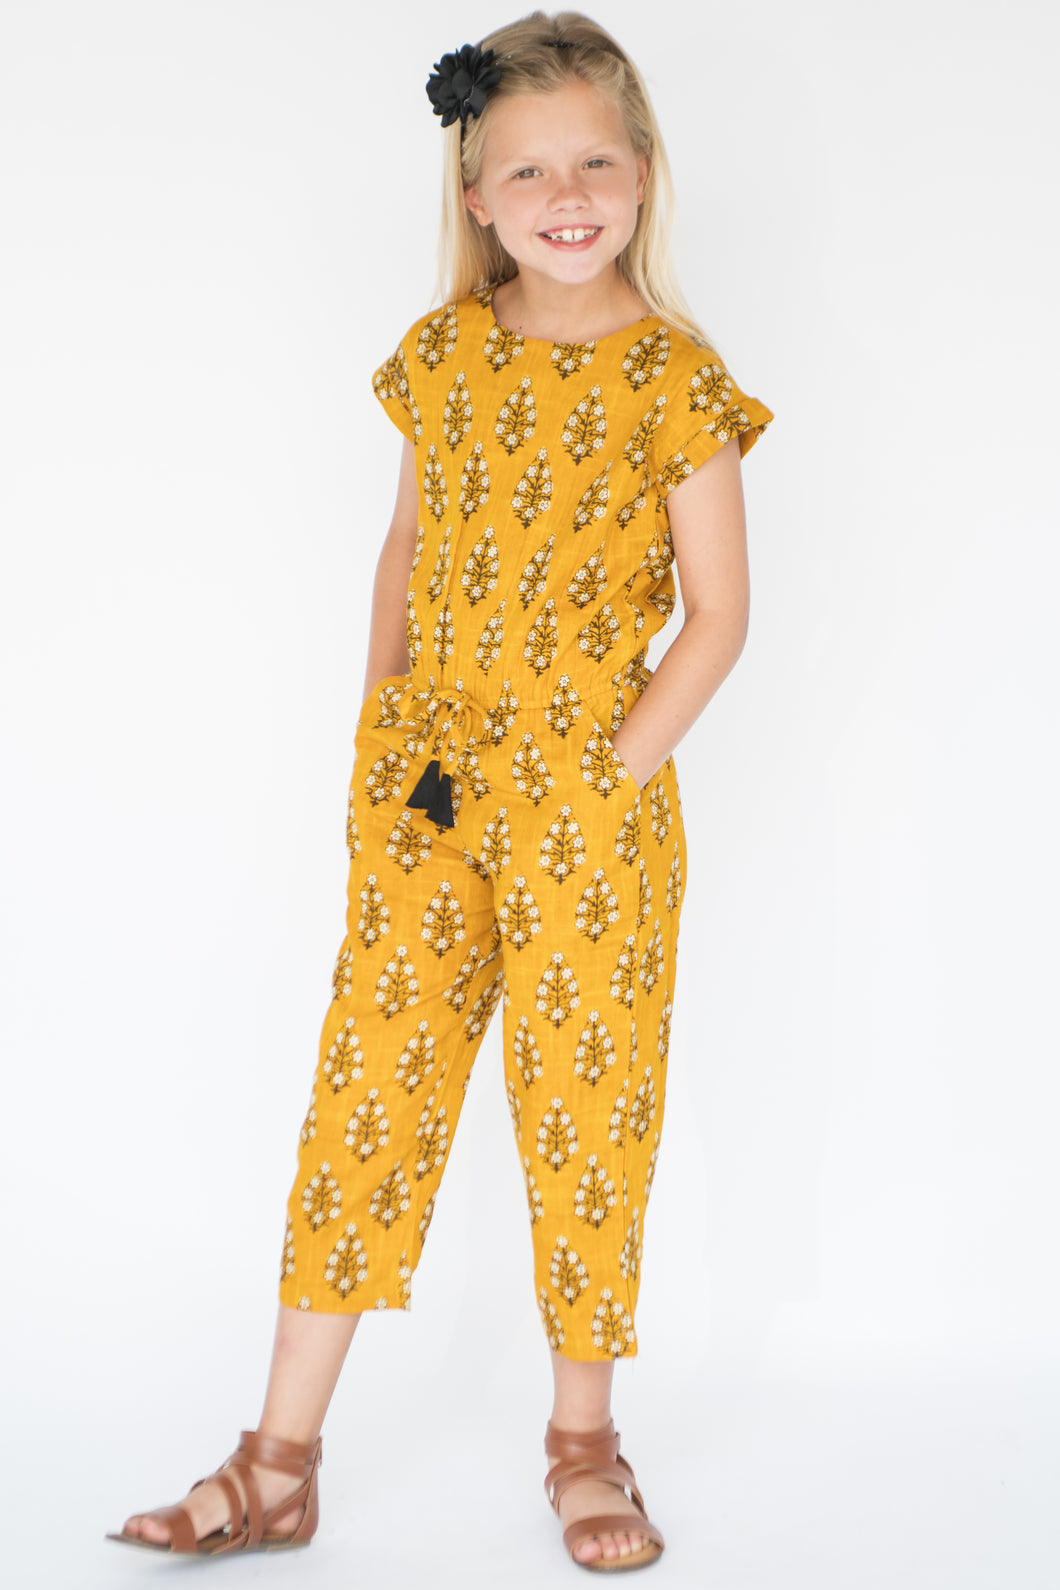 Yellow Jumpsuit With Black Accent - Kids Wholesale Boutique Clothing, Dress - Girls Dresses, Yo Baby Wholesale - Yo Baby